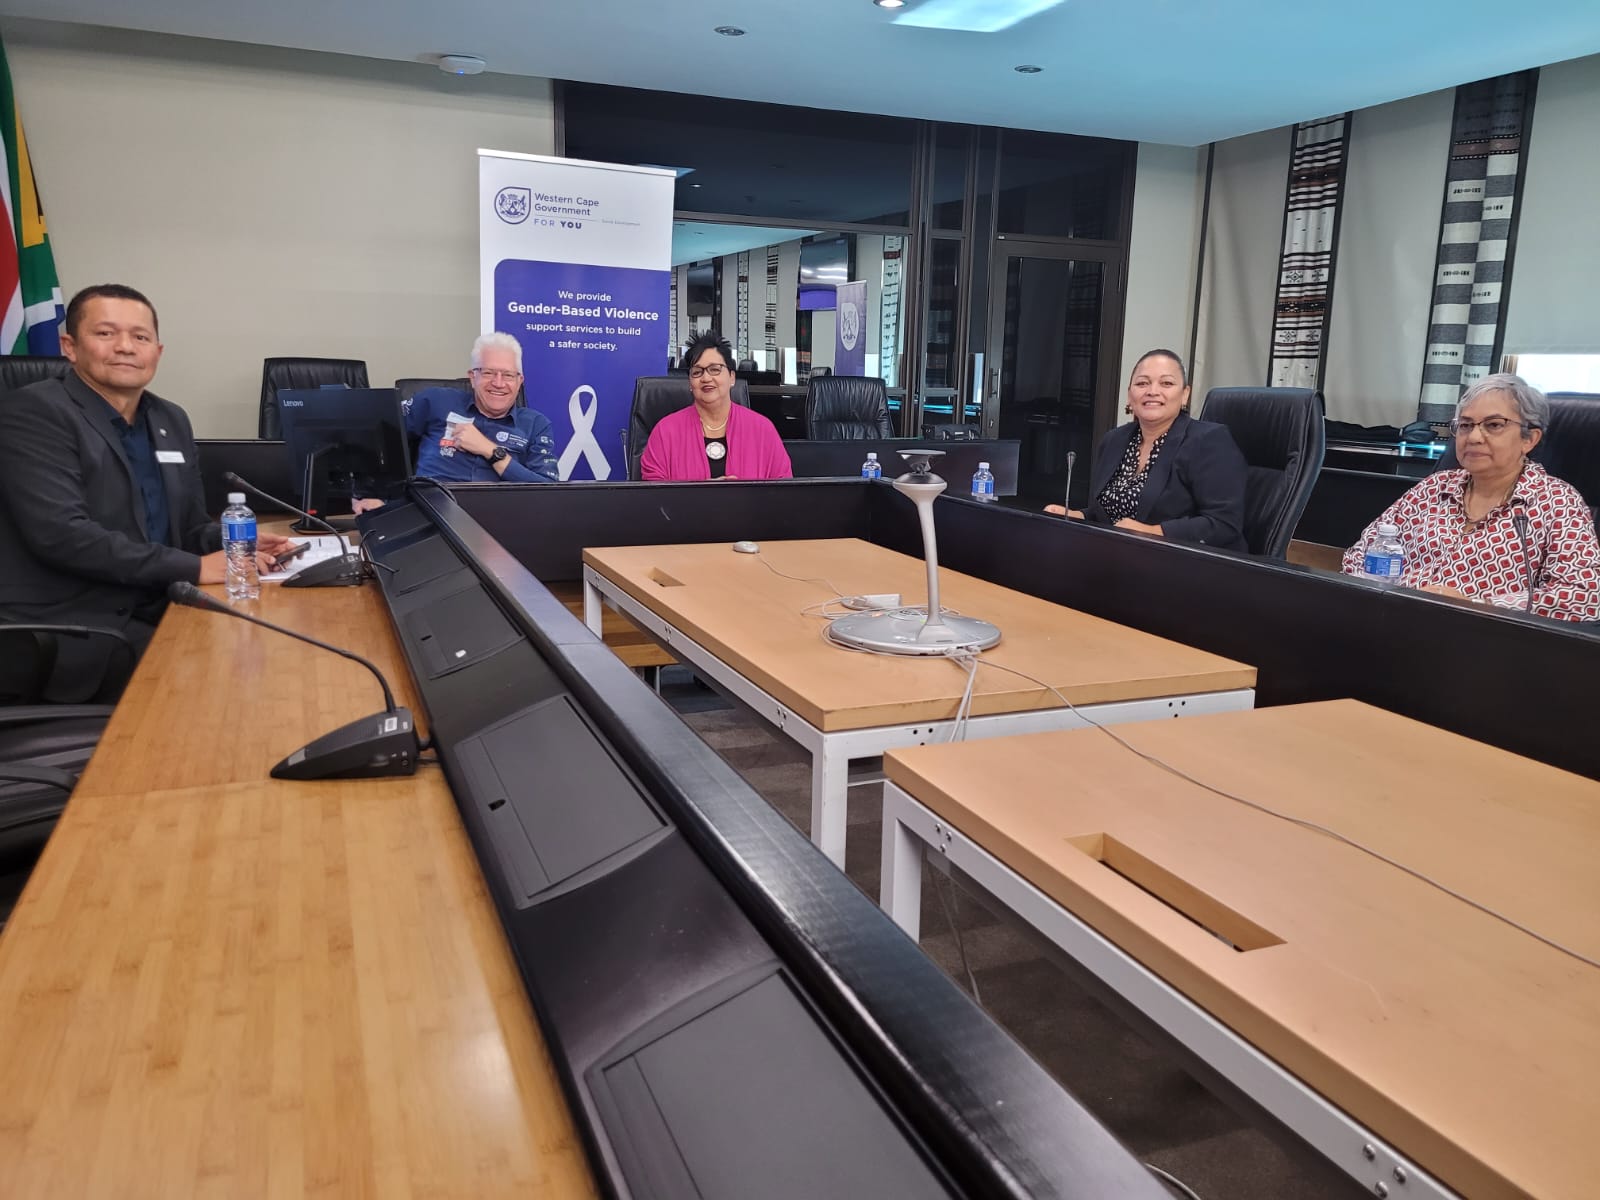 Panelists, from left to right: Dr Keith Cloete, Premier Alan Winde, Minister Sharna Fernandez, Dr Heidi Sauls, and Dr Lucille Meyer.